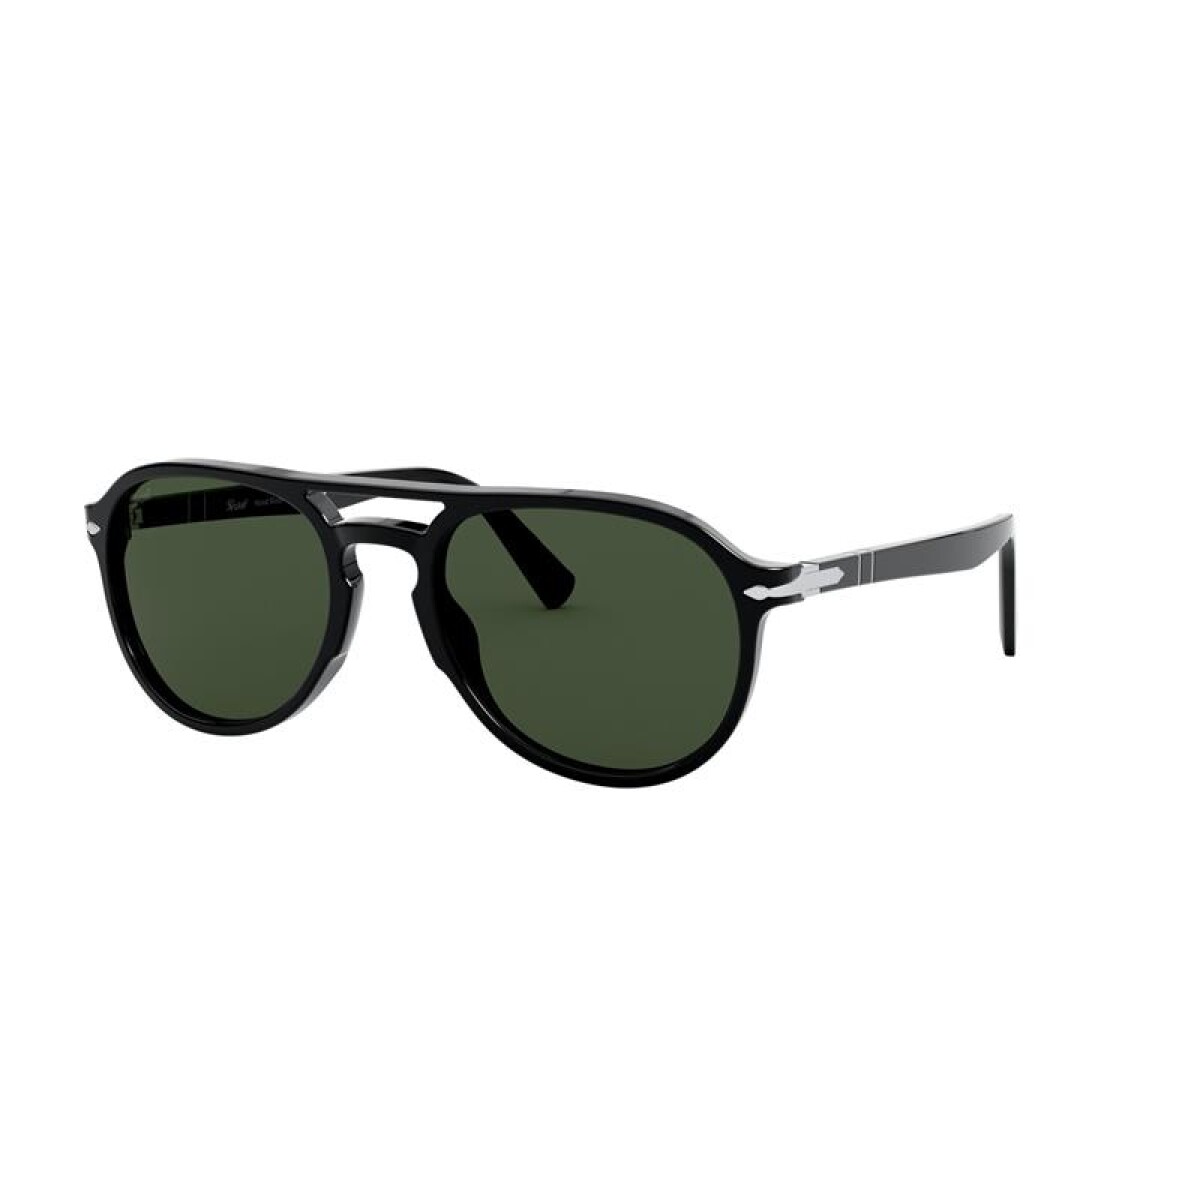 Persol 3235-s - 95/31 